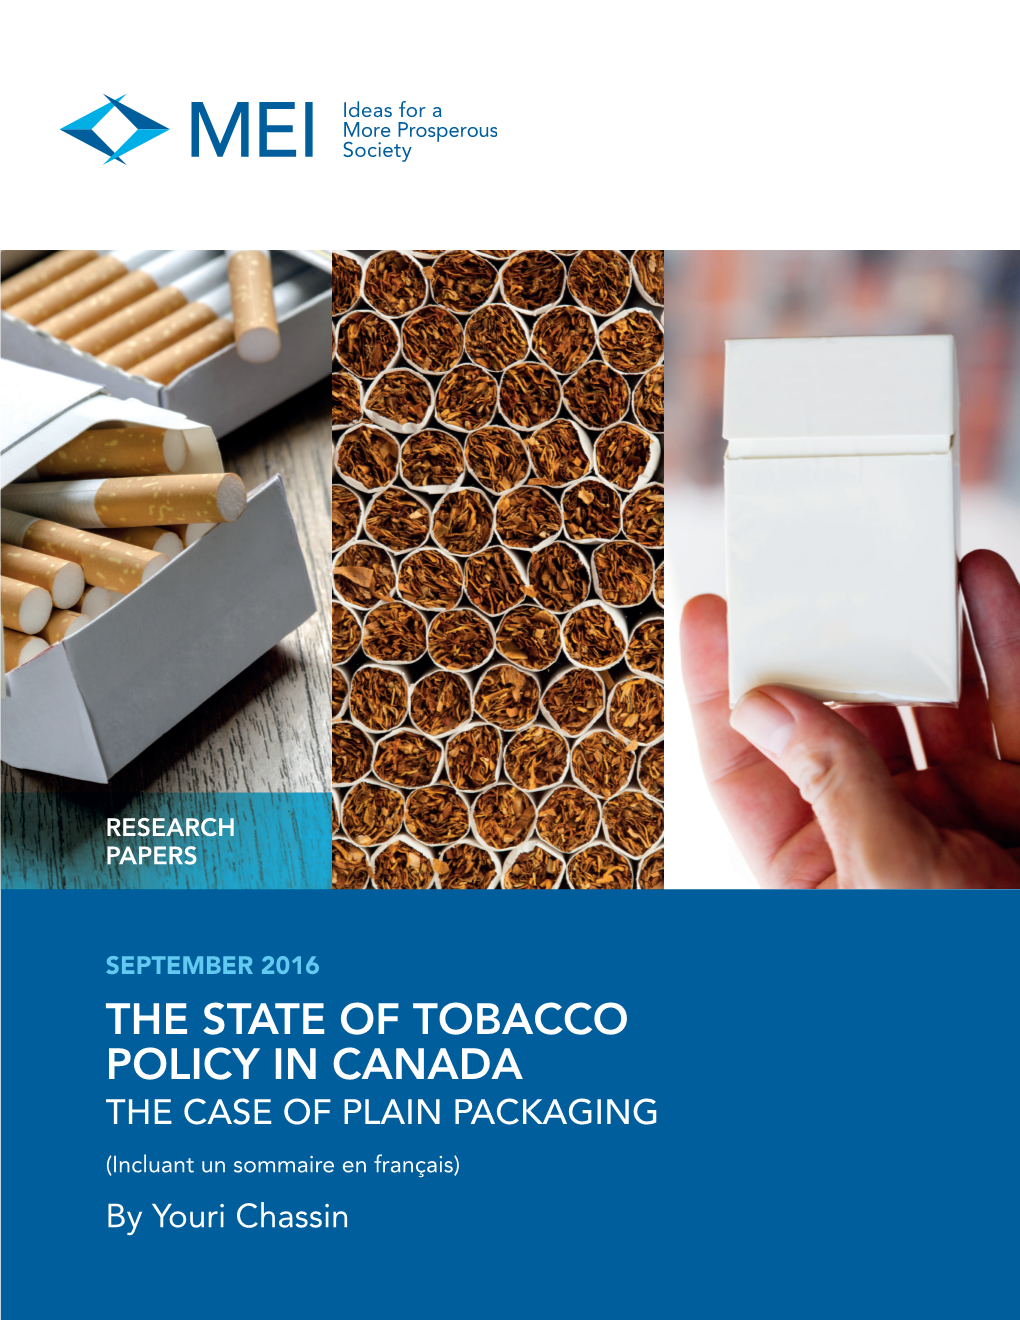 The State of Tobacco Policy in Canada: the Case of Plain Packaging